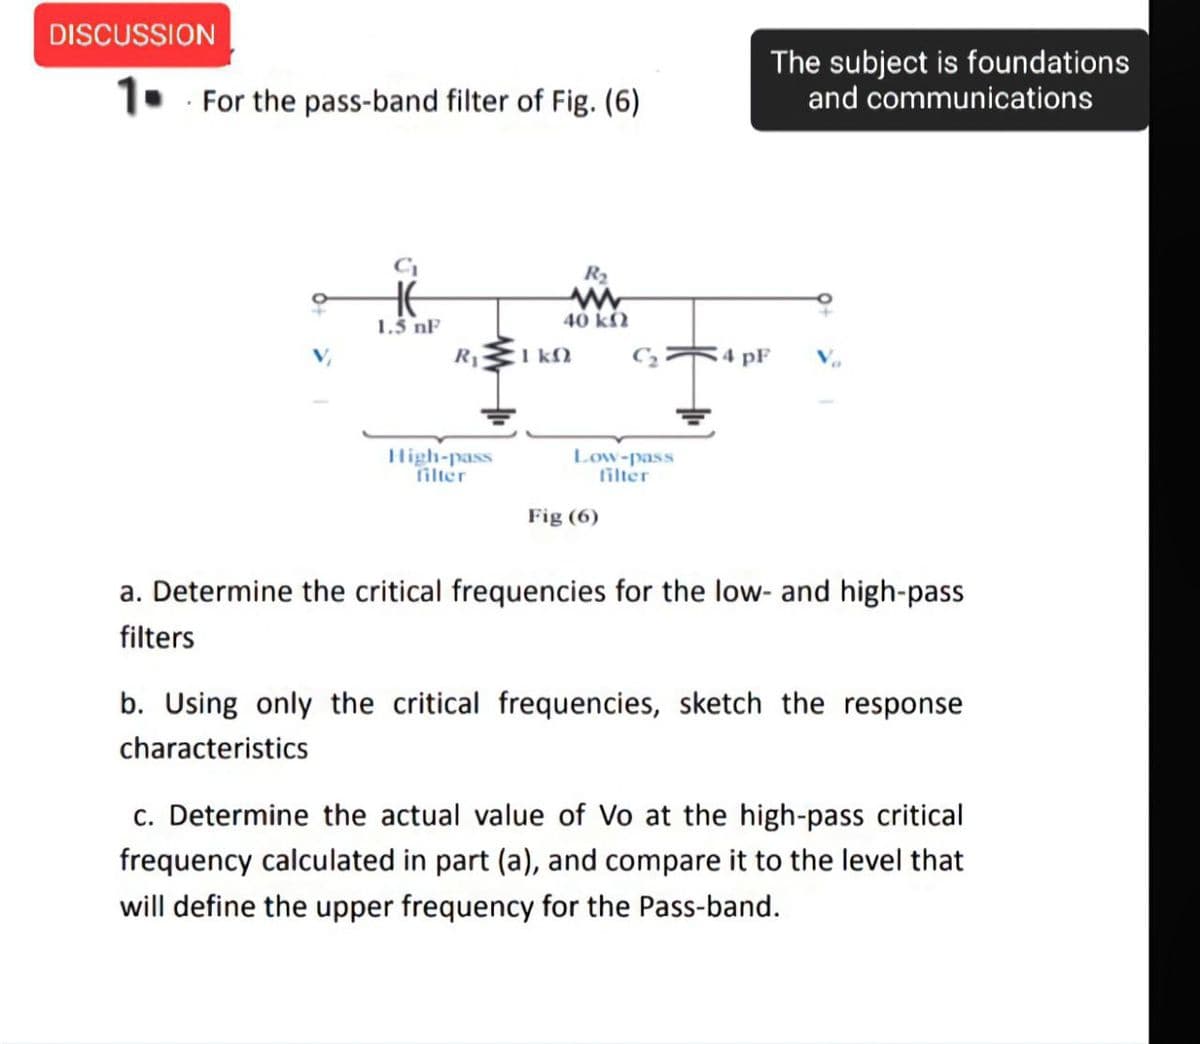 DISCUSSION
The subject is foundations
and communications
1. For the pass-band filter of Fig. (6)
R2
HE
1.5 nF
40 kN
R1
I kM
4 pF
High-pass
filter
Low-pass
filter
Fig (6)
a. Determine the critical frequencies for the low- and high-pass
filters
b. Using only the critical frequencies, sketch the response
characteristics
c. Determine the actual value of Vo at the high-pass critical
frequency calculated in part (a), and compare it to the level that
will define the upper frequency for the Pass-band.
